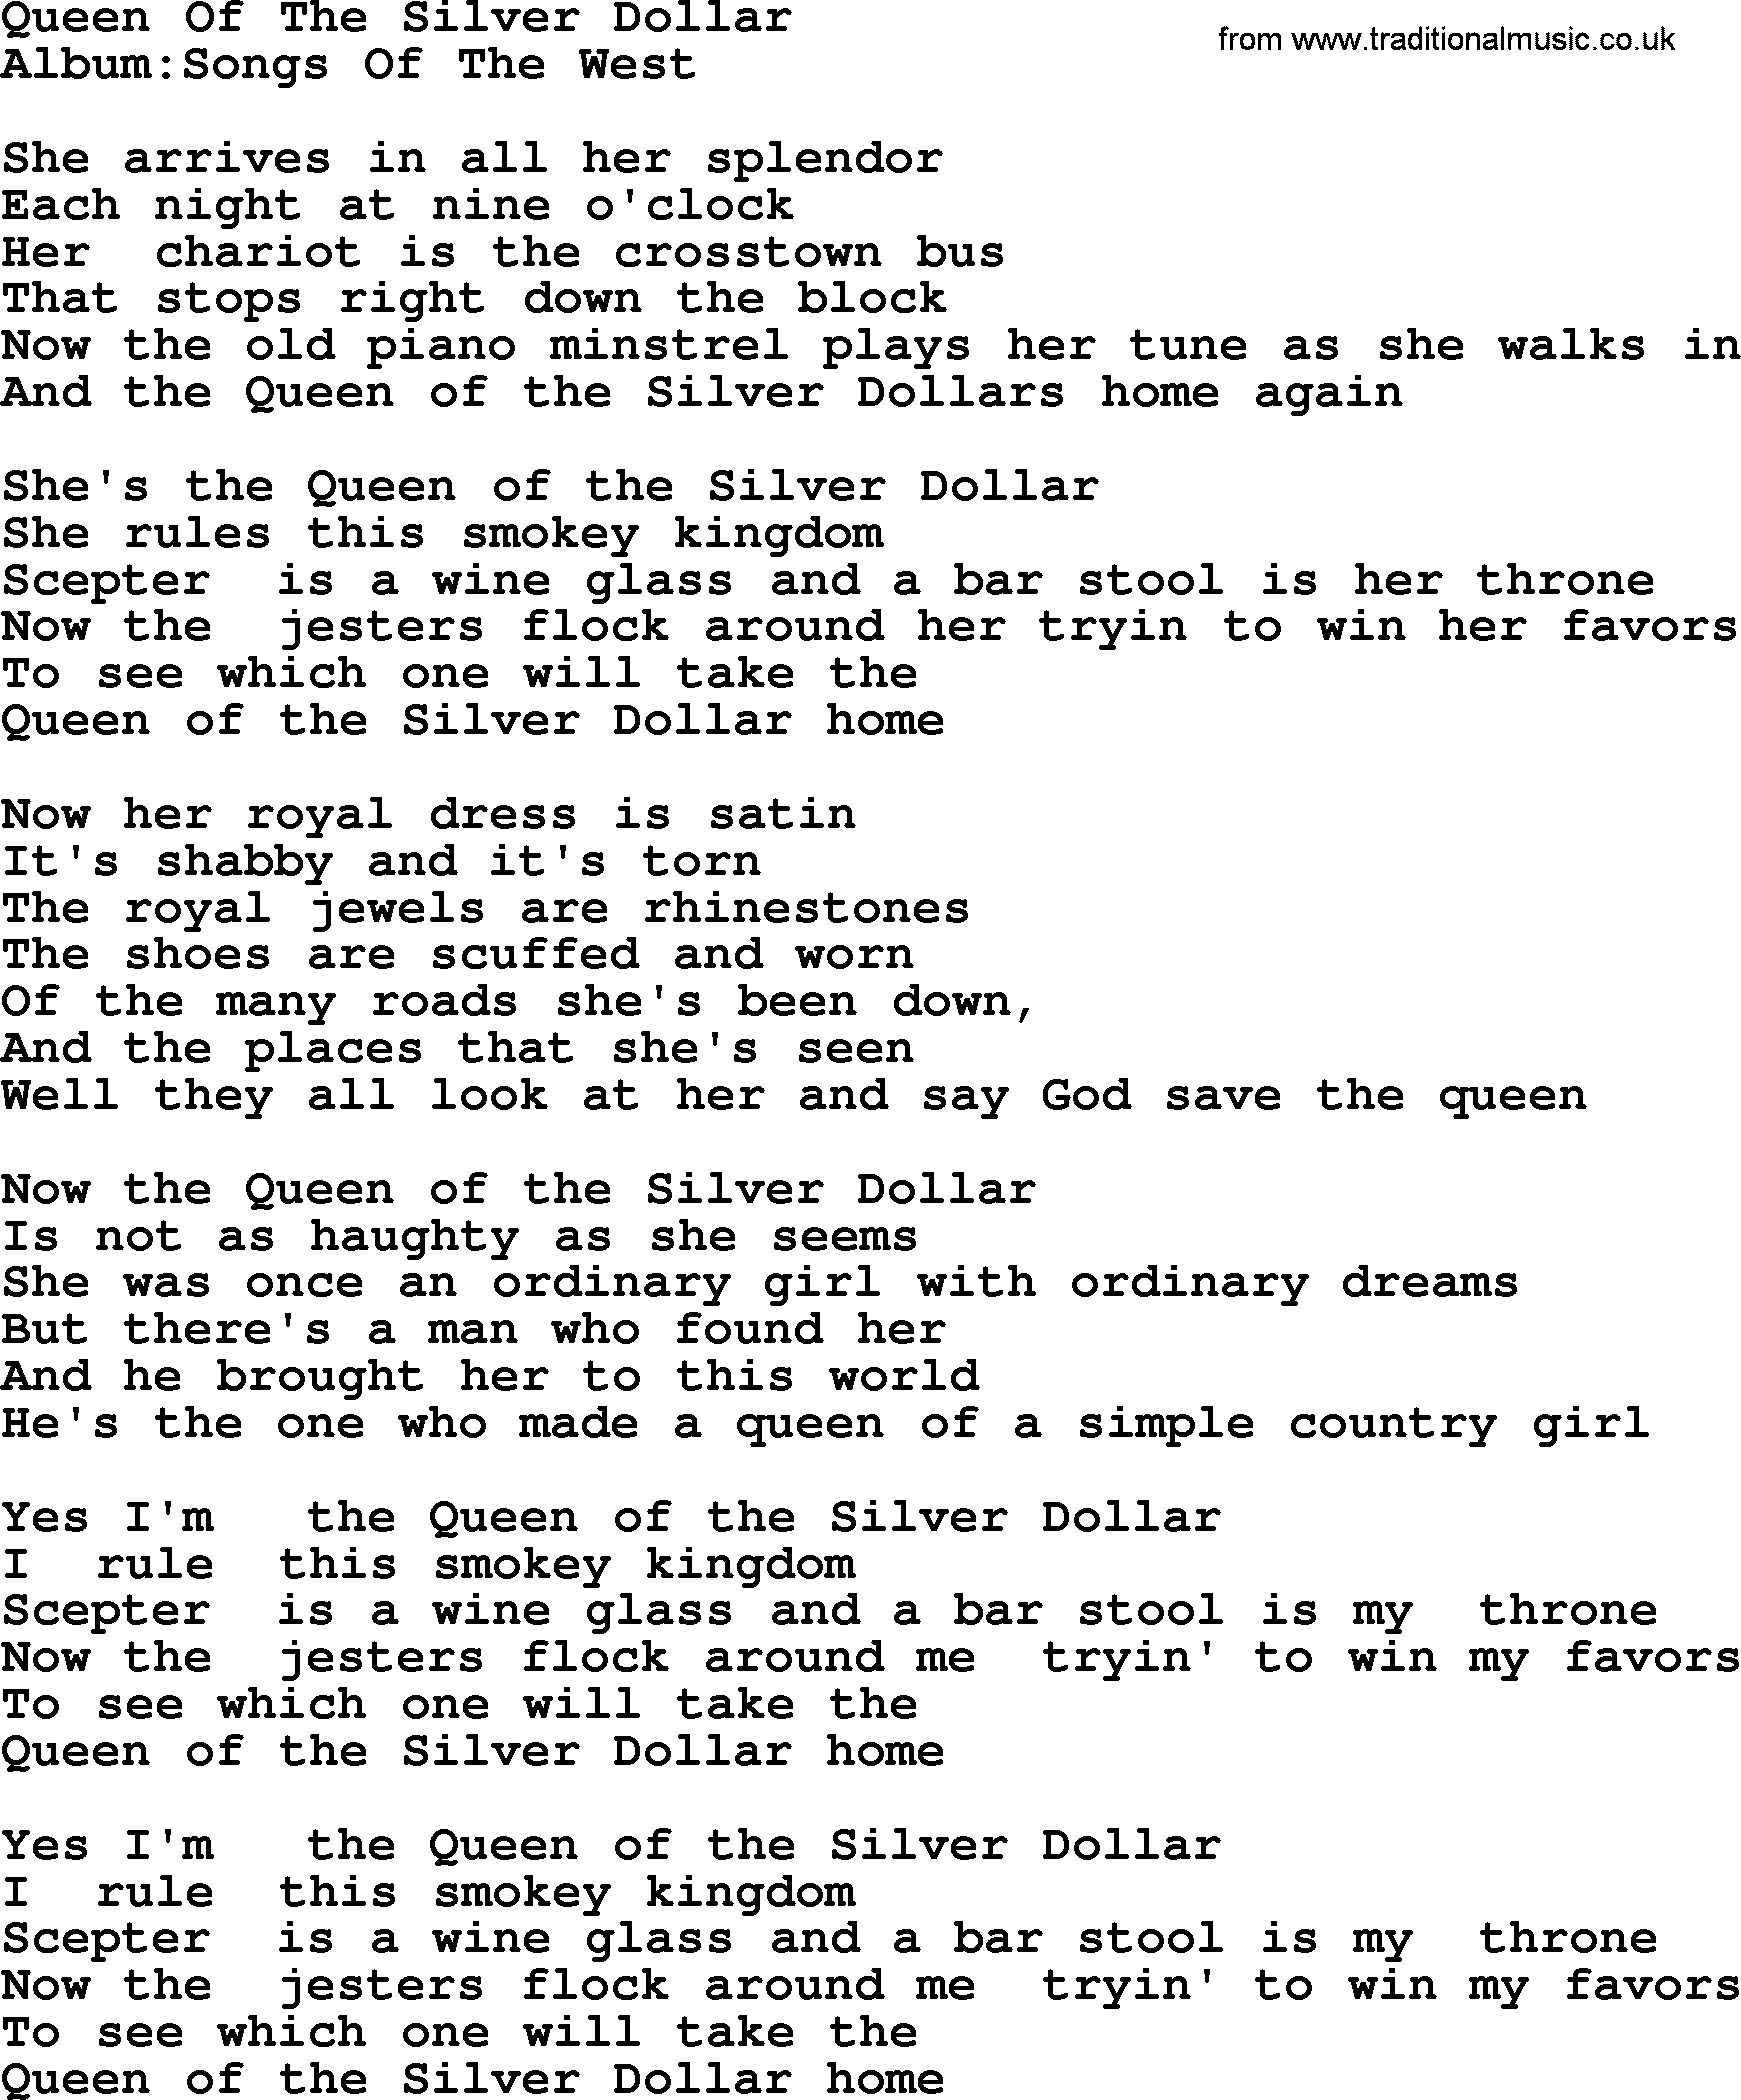 Emmylou Harris song: Queen Of The Silver Dollar lyrics